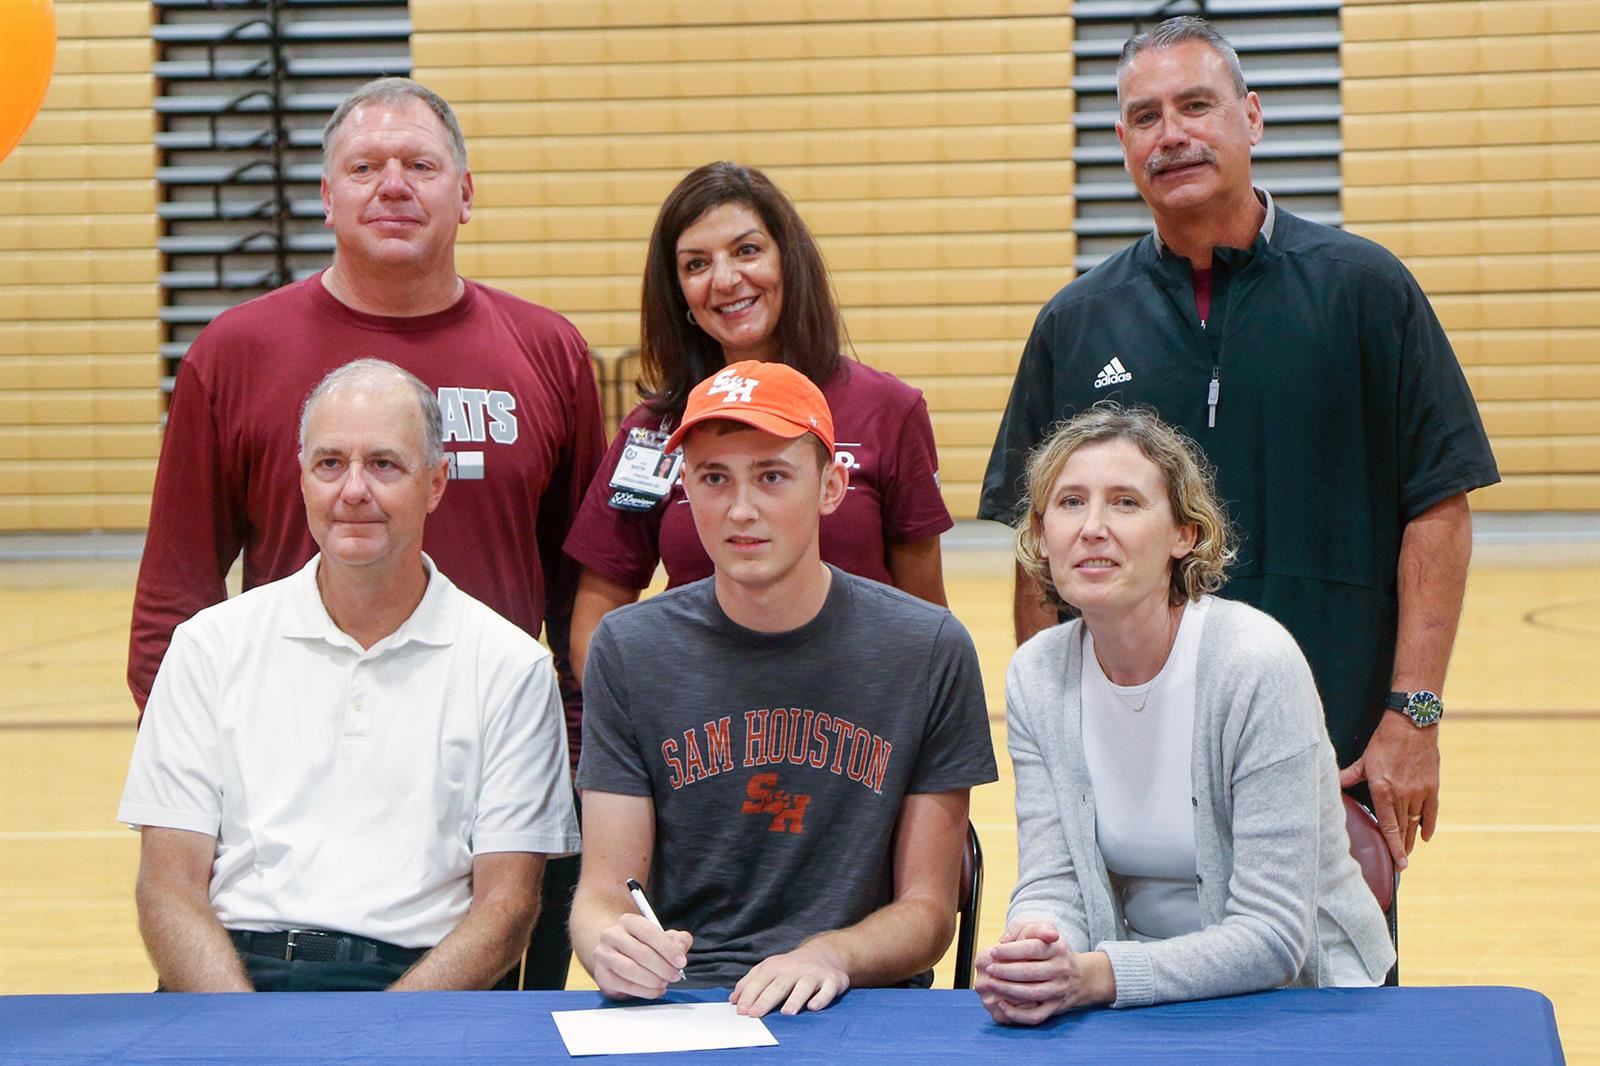 Cy-Fair High School senior Thomas Pickrell, seated center, signed a letter of intent to play golf collegiately